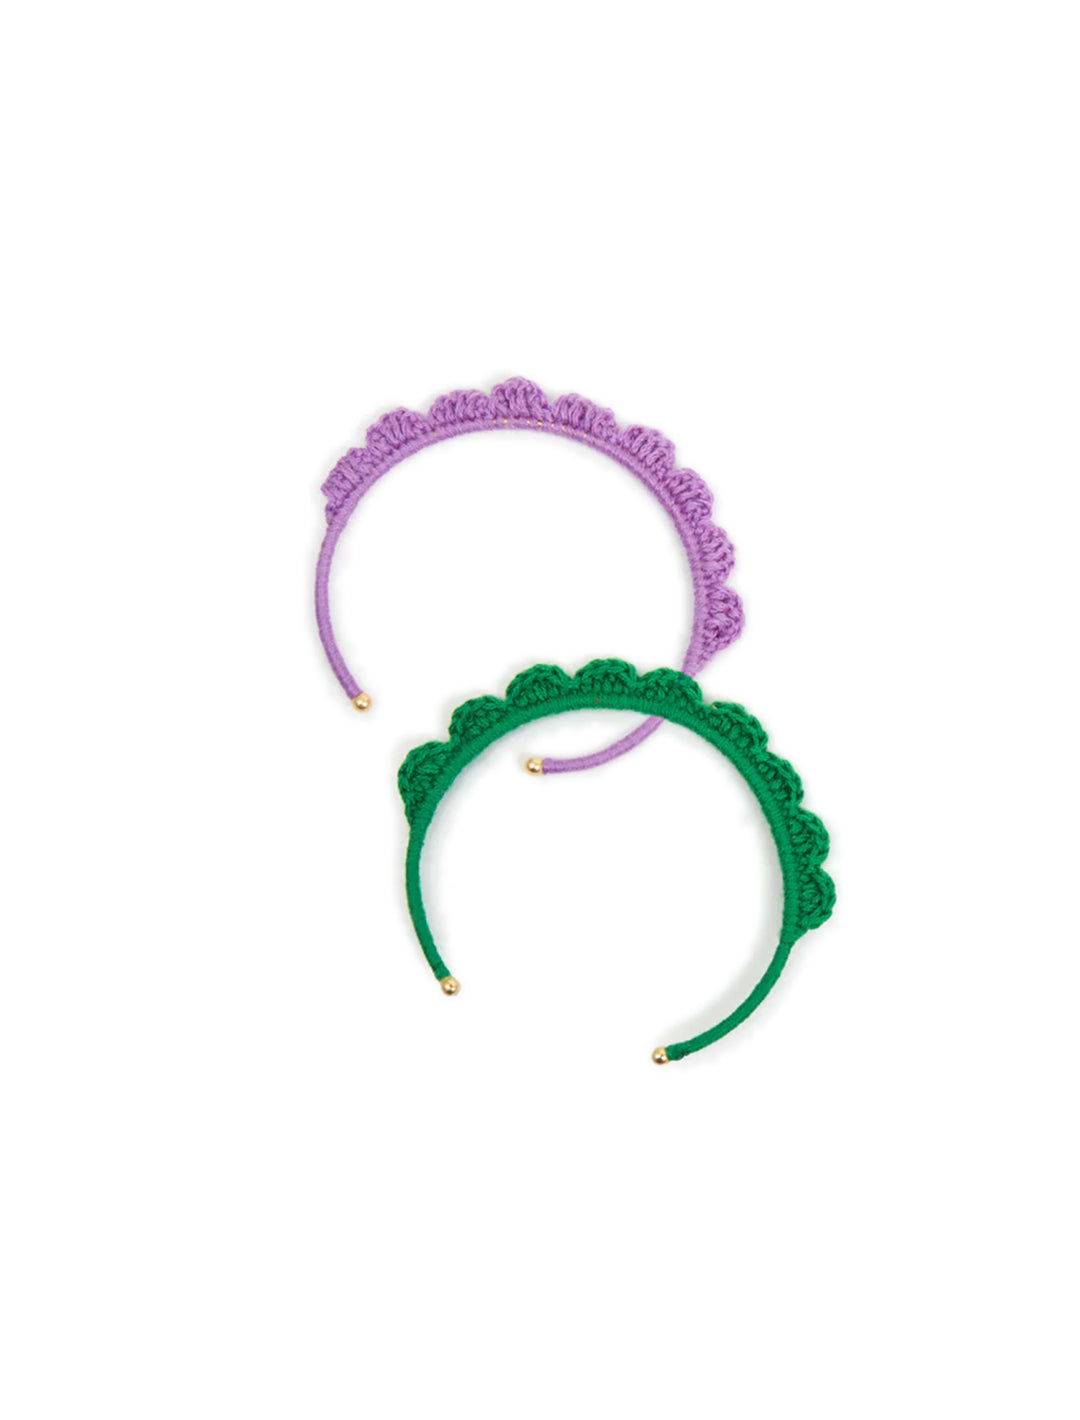 Overhead view of Clare V.'s crochet cuff set in lilac and emerald.